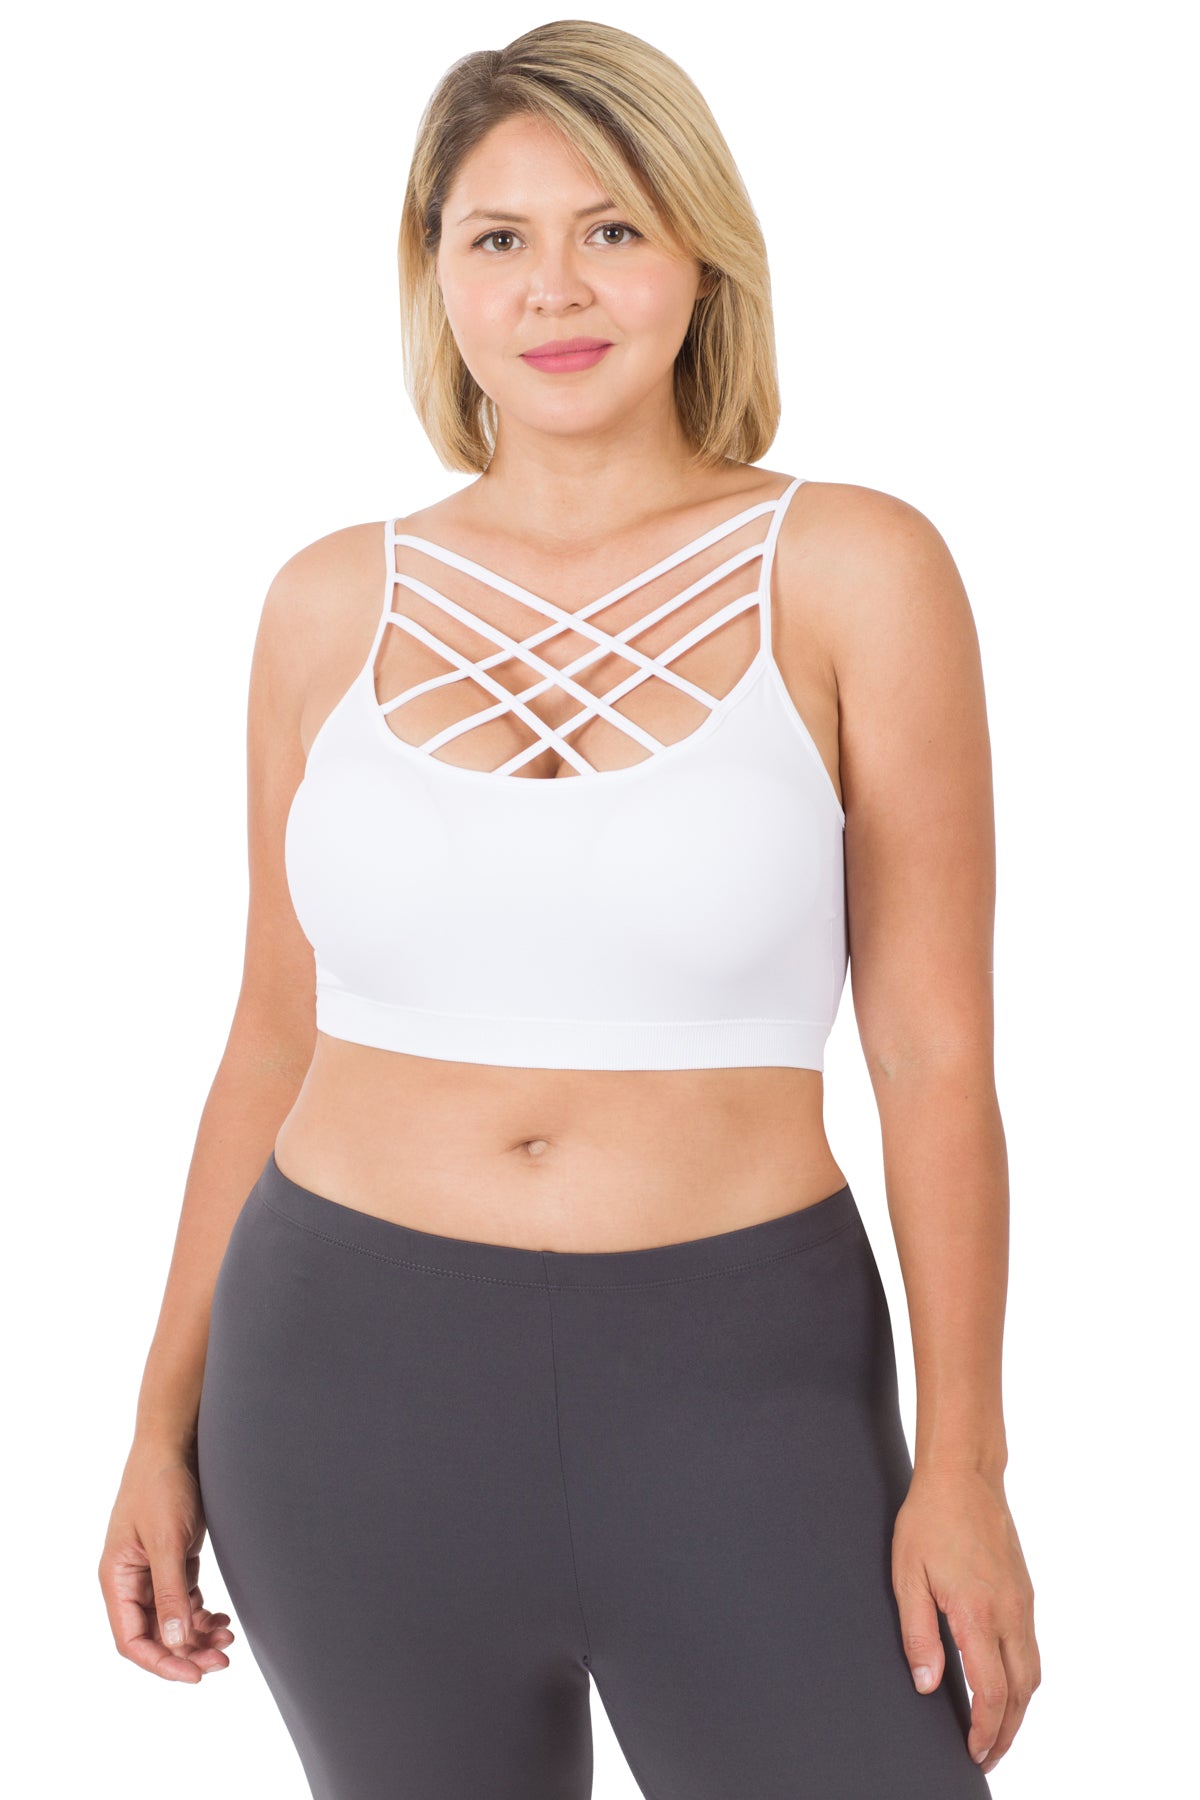 Criss Cross Bralette Red or White – Bite the Apple Boutique